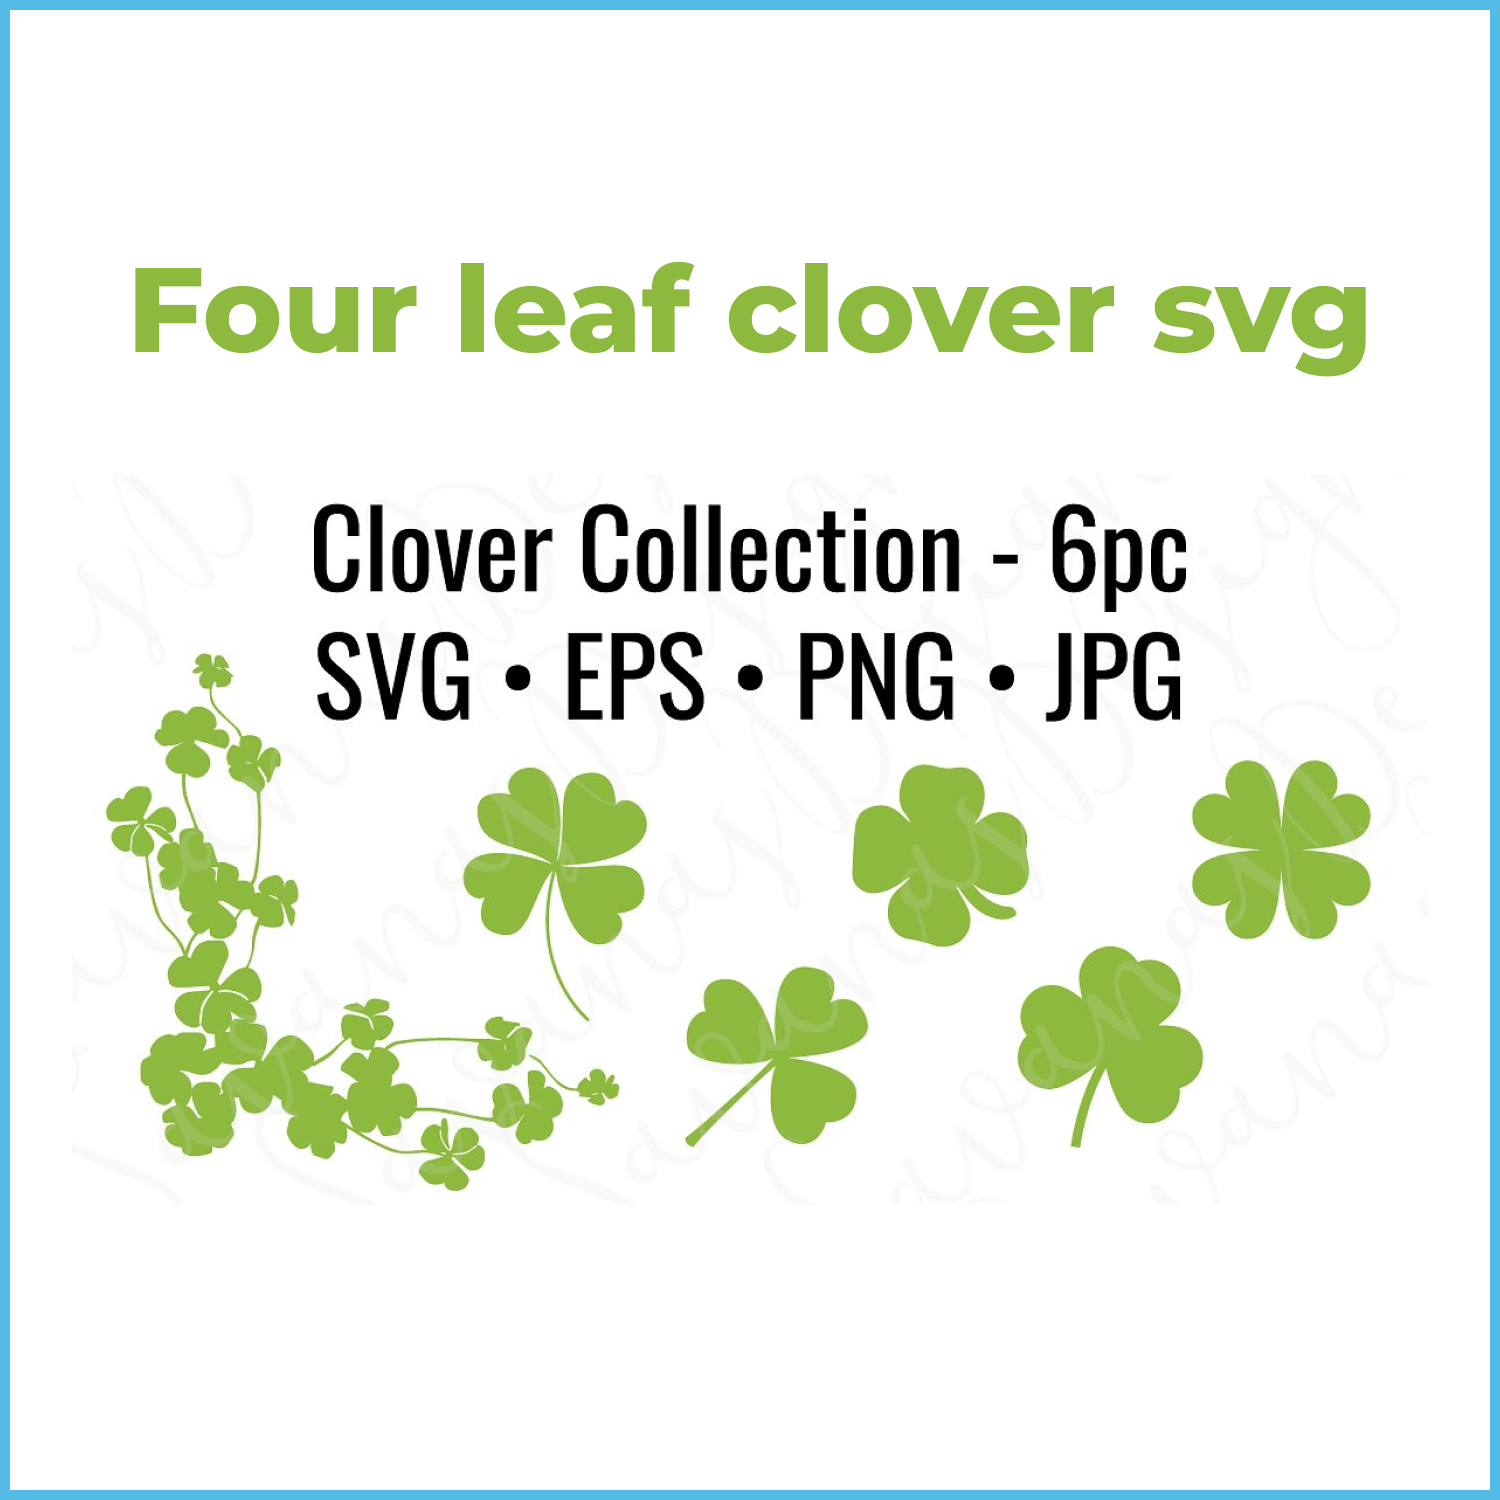 Preview shamrock cut files and clipart.